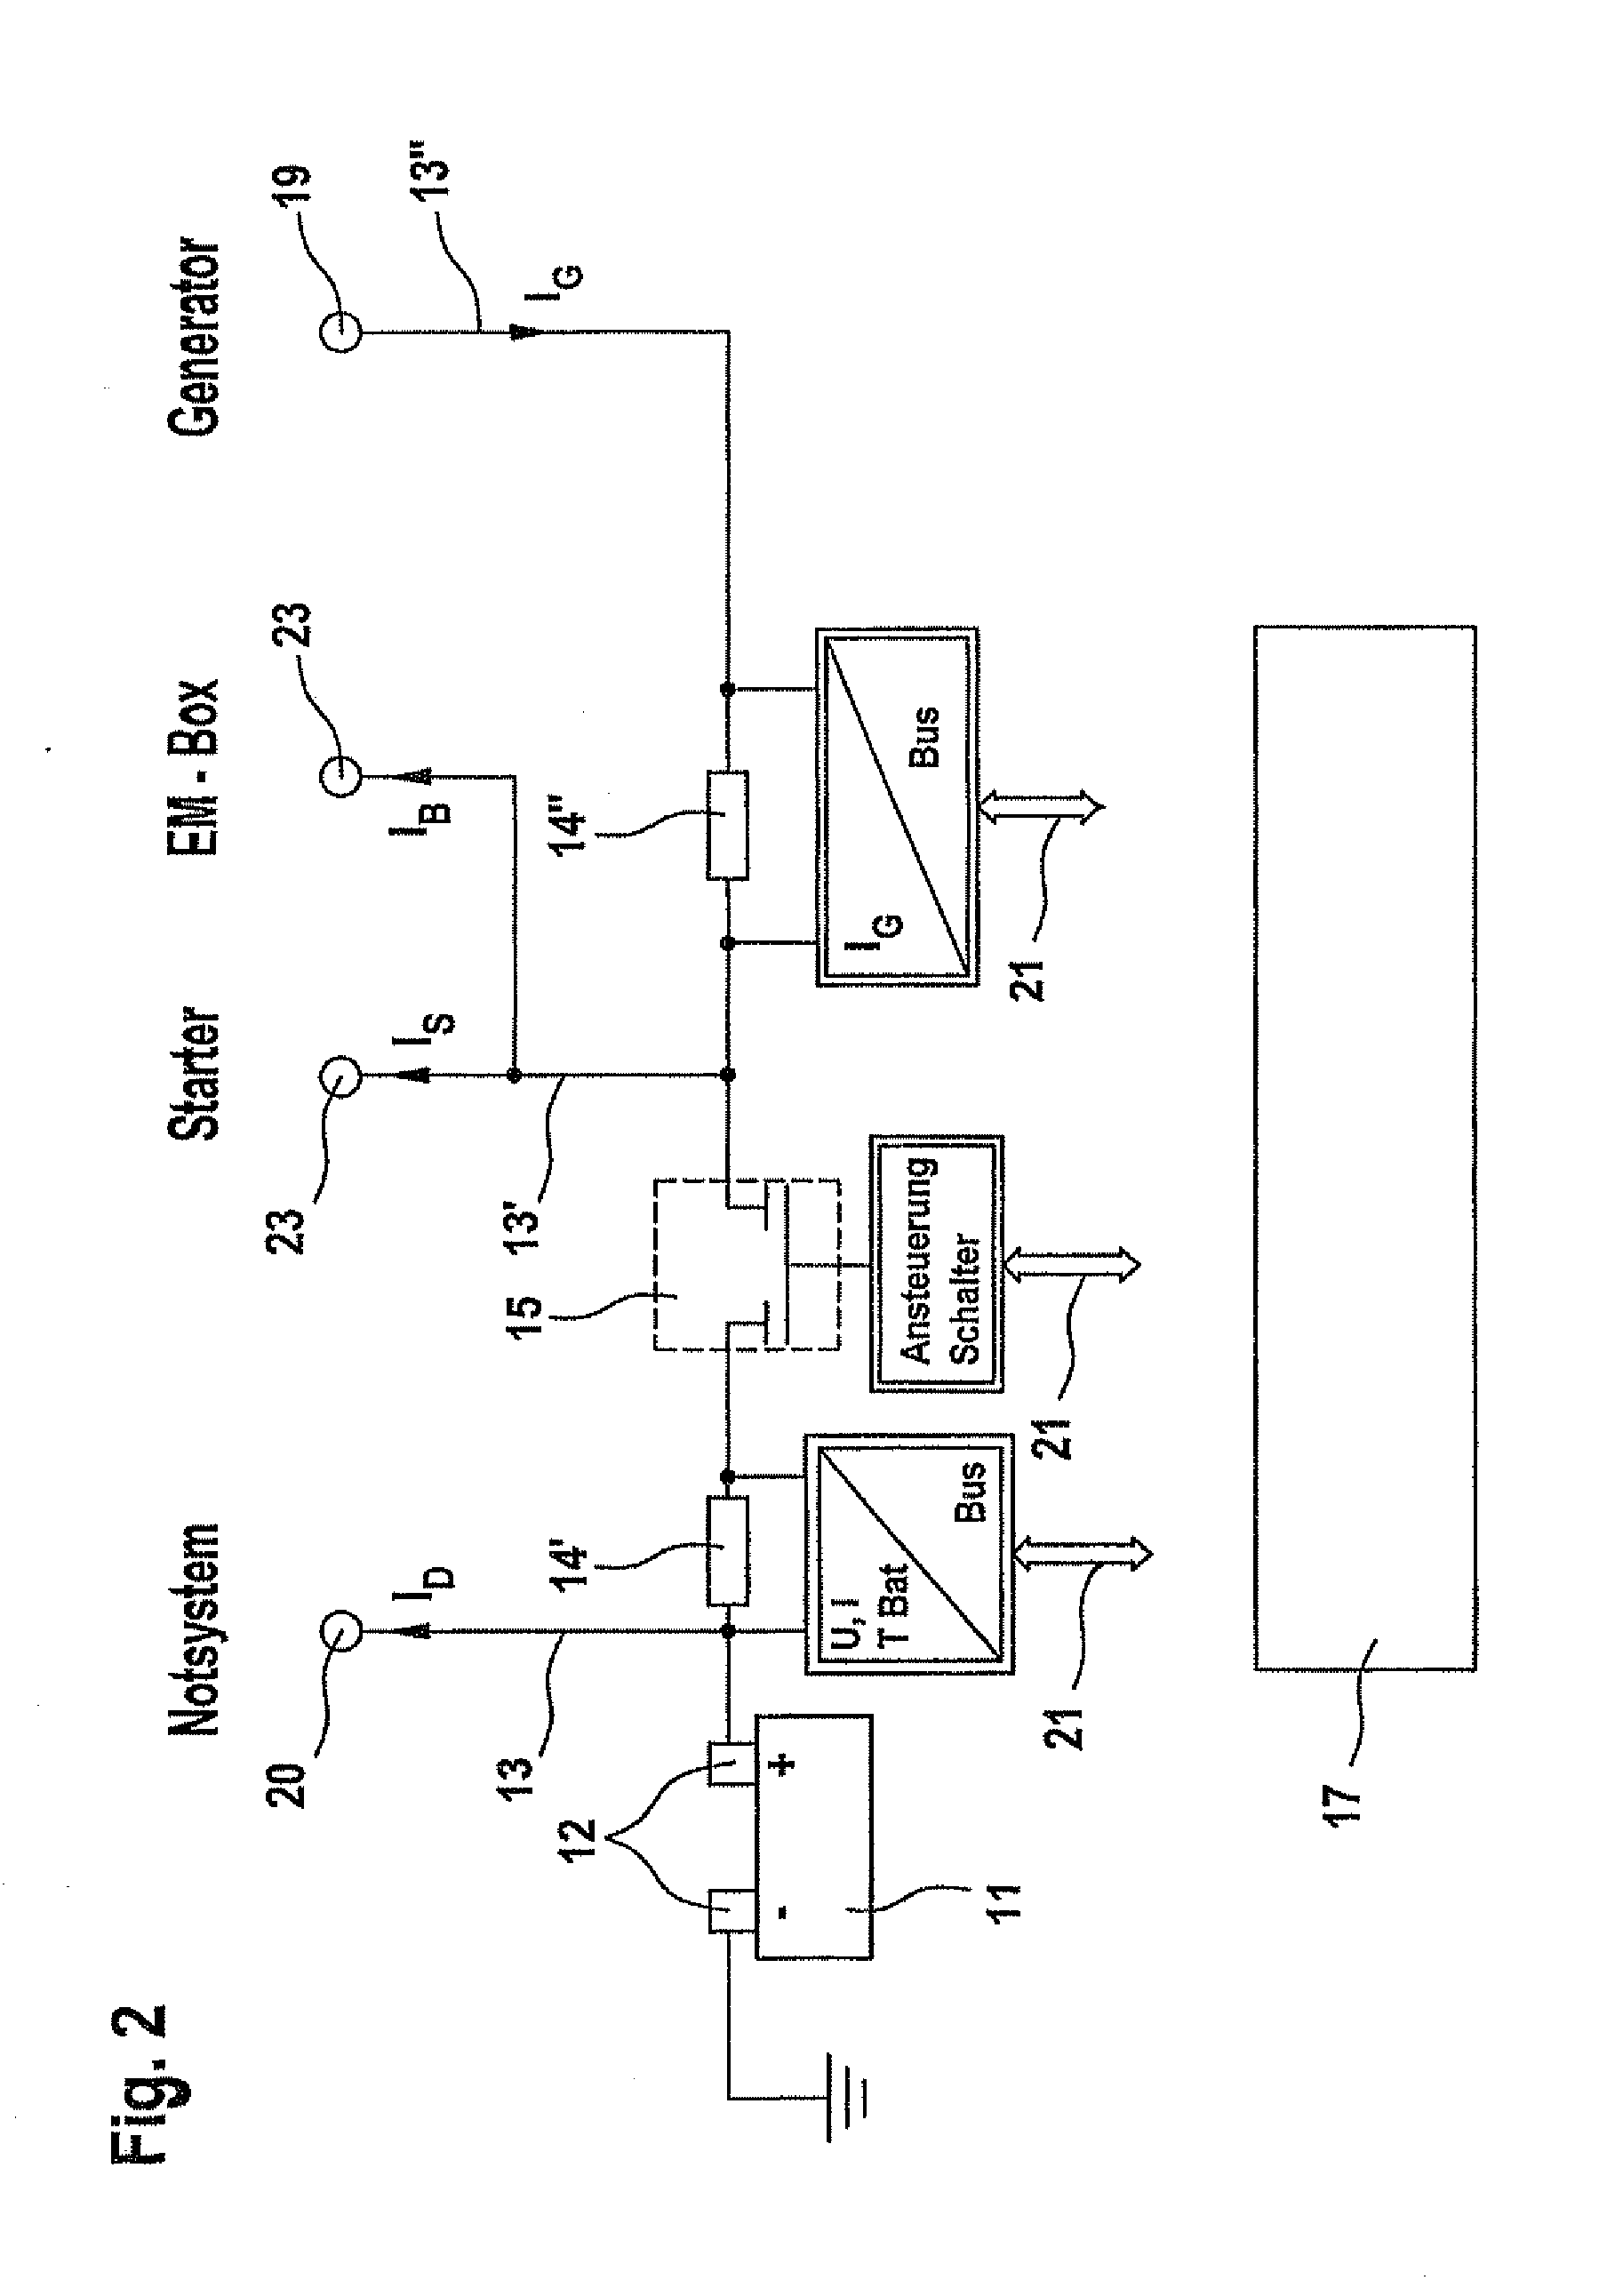 Vehicle Electrical System